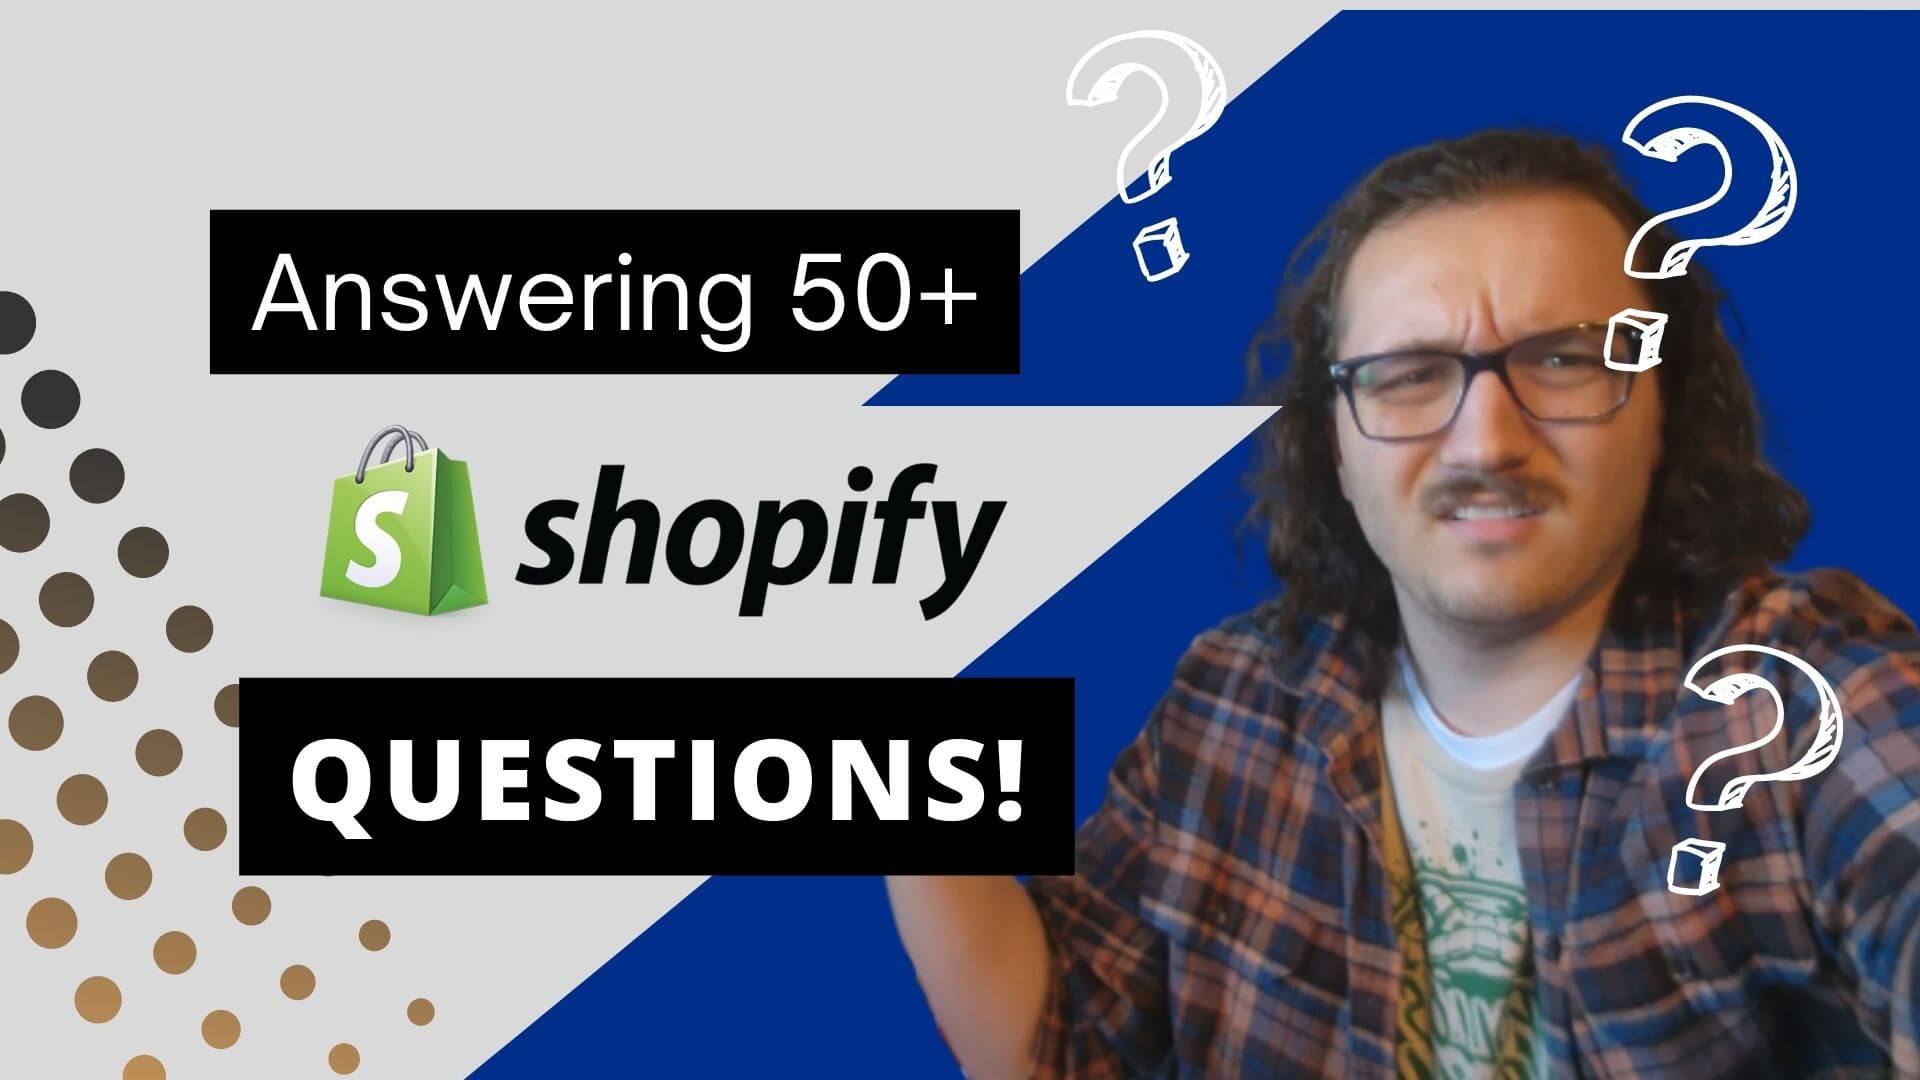 Answering 50+ Shopify Questions Graphic featuring the author making a question mark face surrounded by little question marks